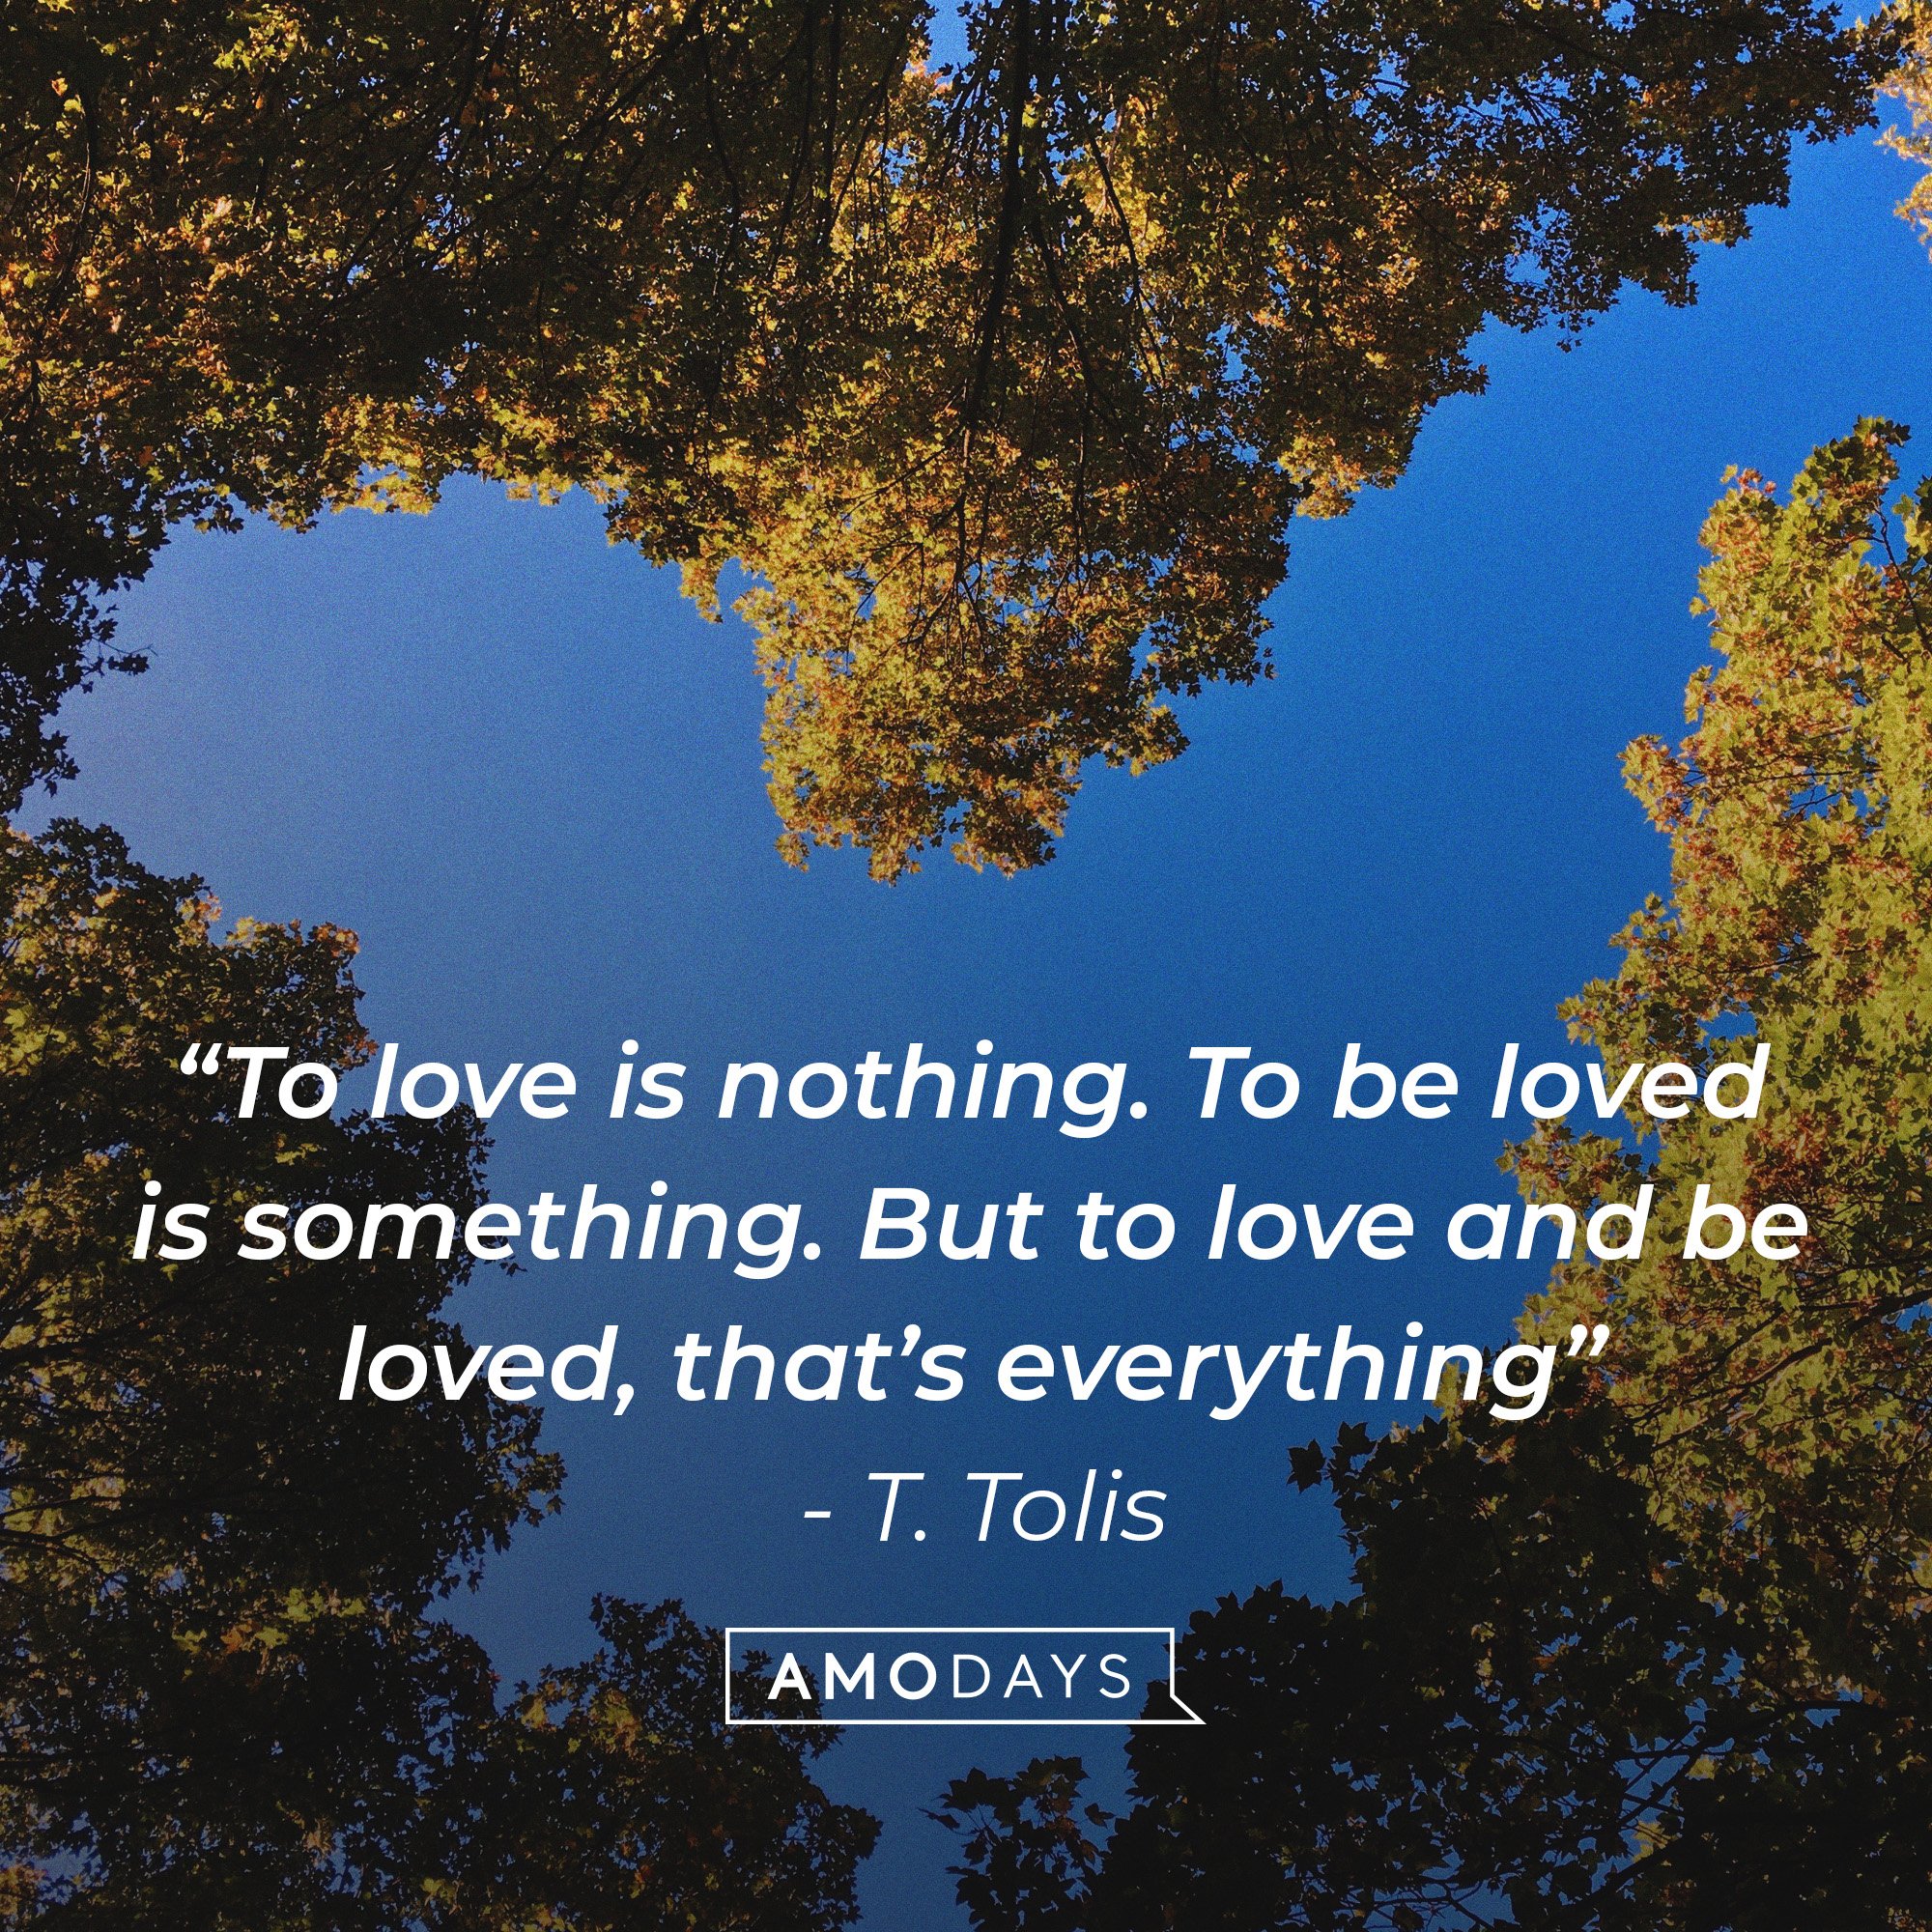 T. Tolis's quote: To love is nothing. To be loved is something. But to love and be loved, that’s everything” | Image: AmoDays